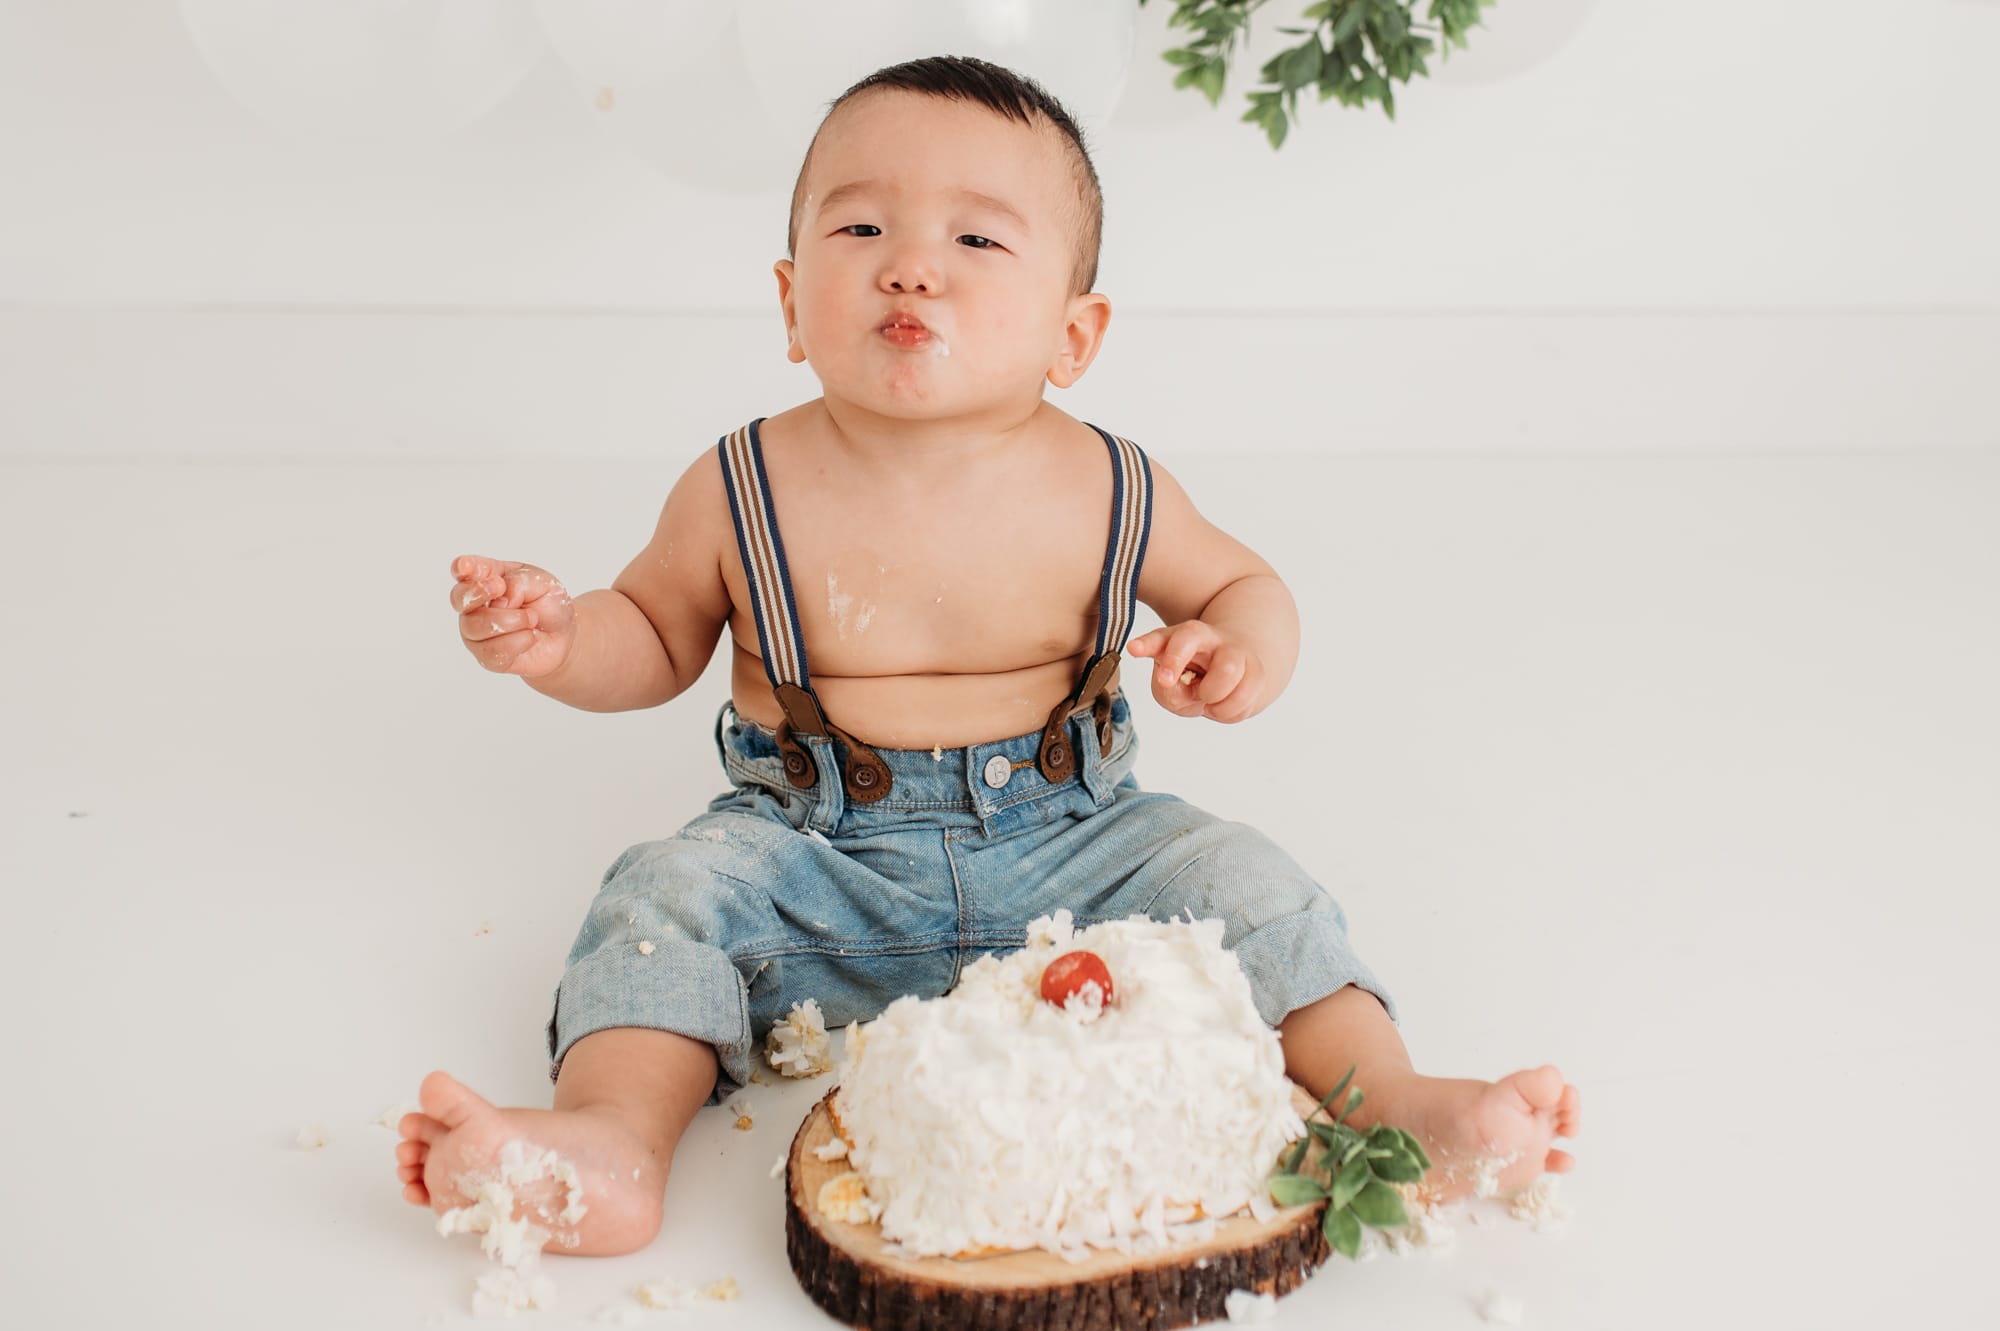 Baby blows kisses in blue denim and suspenders while eating cake in a Lower Mainland studio.